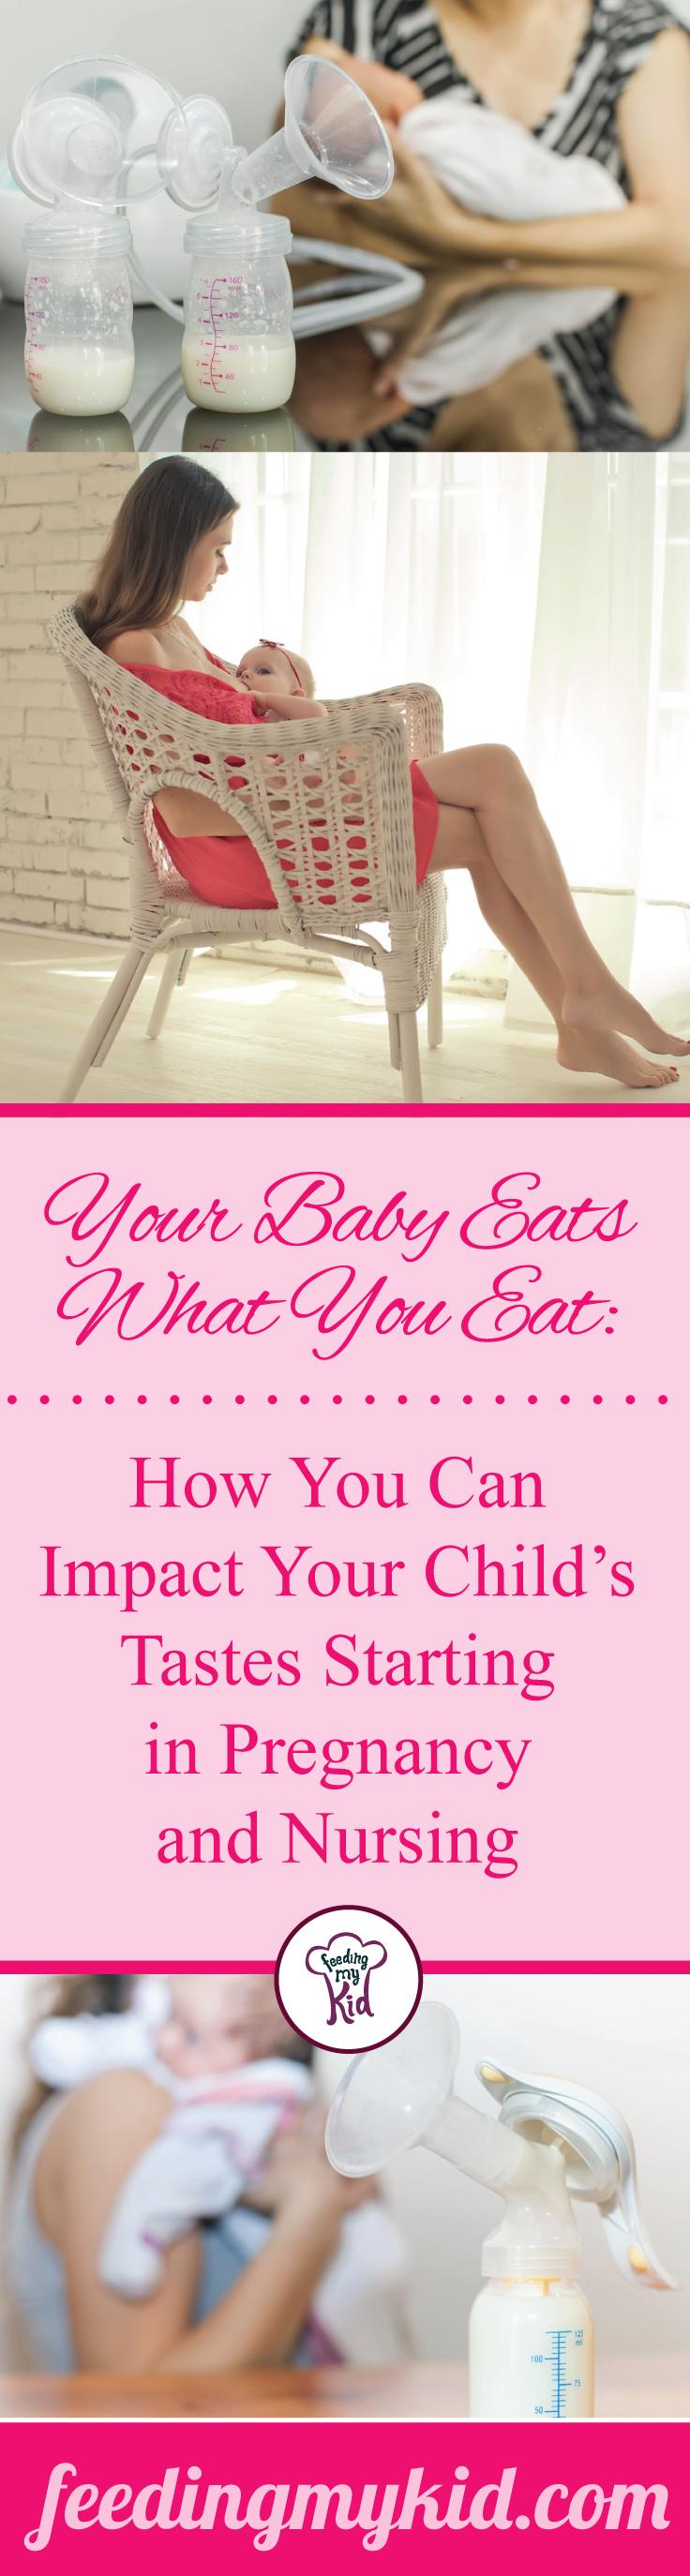 Your Baby Eats What You Eat: How You Can Impact Your Child’s Tastes Starting in Pregnancy and Nursing - That’s right! In fact, the food you eat when you are nursing can play a big part in whether your child becomes a picky eater or not. You might be thinking, I know a lot of people who breastfed and still have a picky eater.